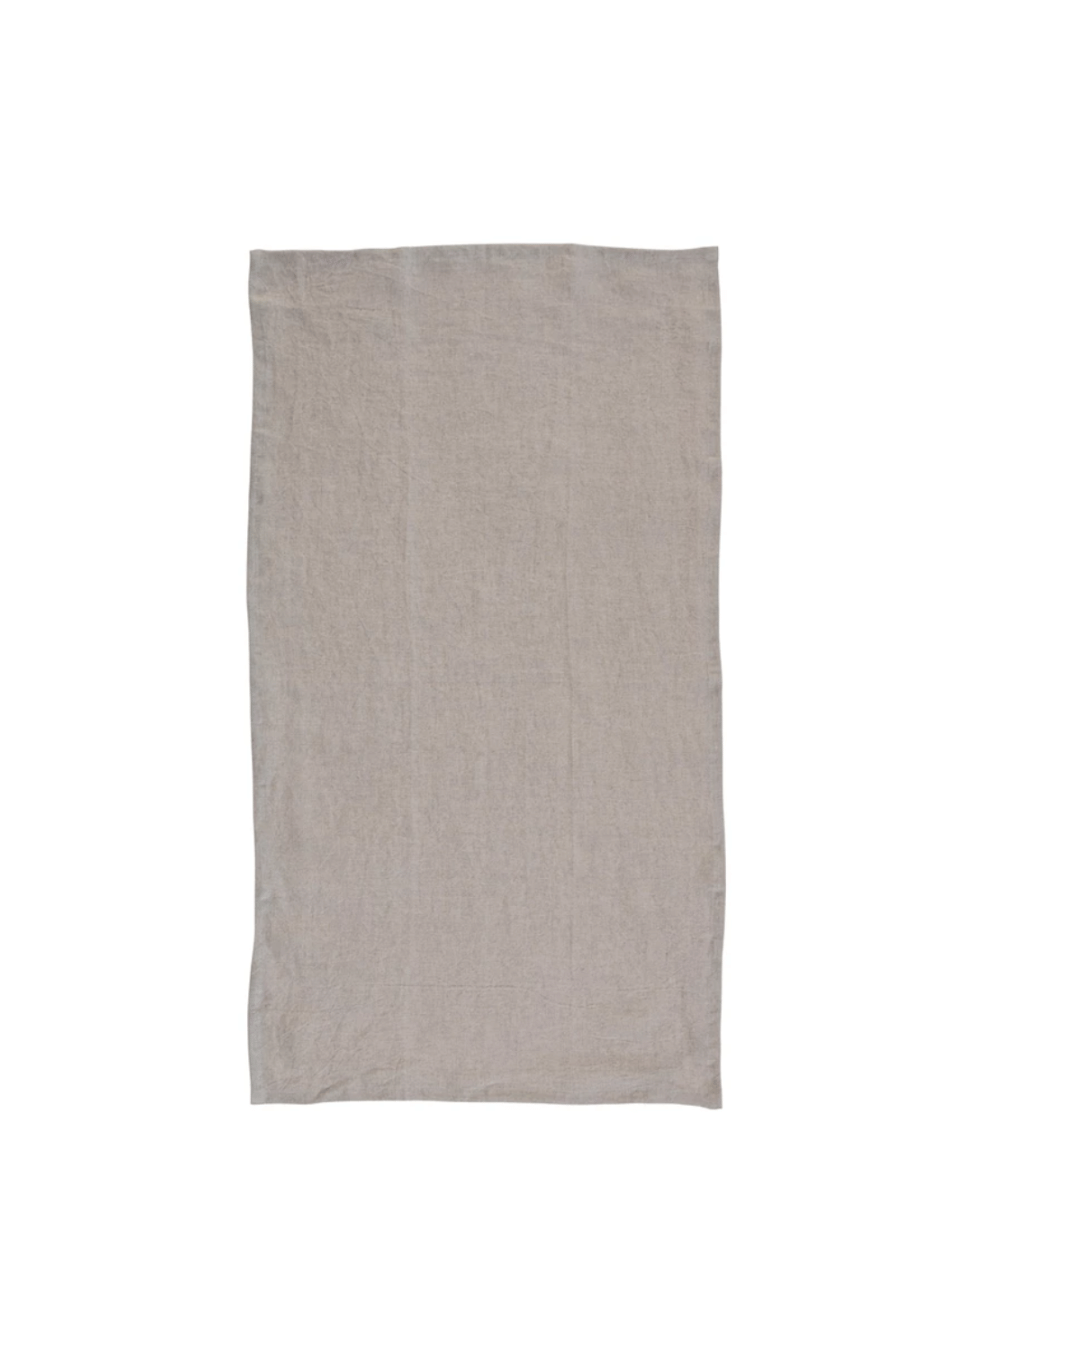 A plain beige oversized stonewashed linen tea towel natural laid flat on a white background in a Scottsdale, Arizona bungalow by Creative Co-op.